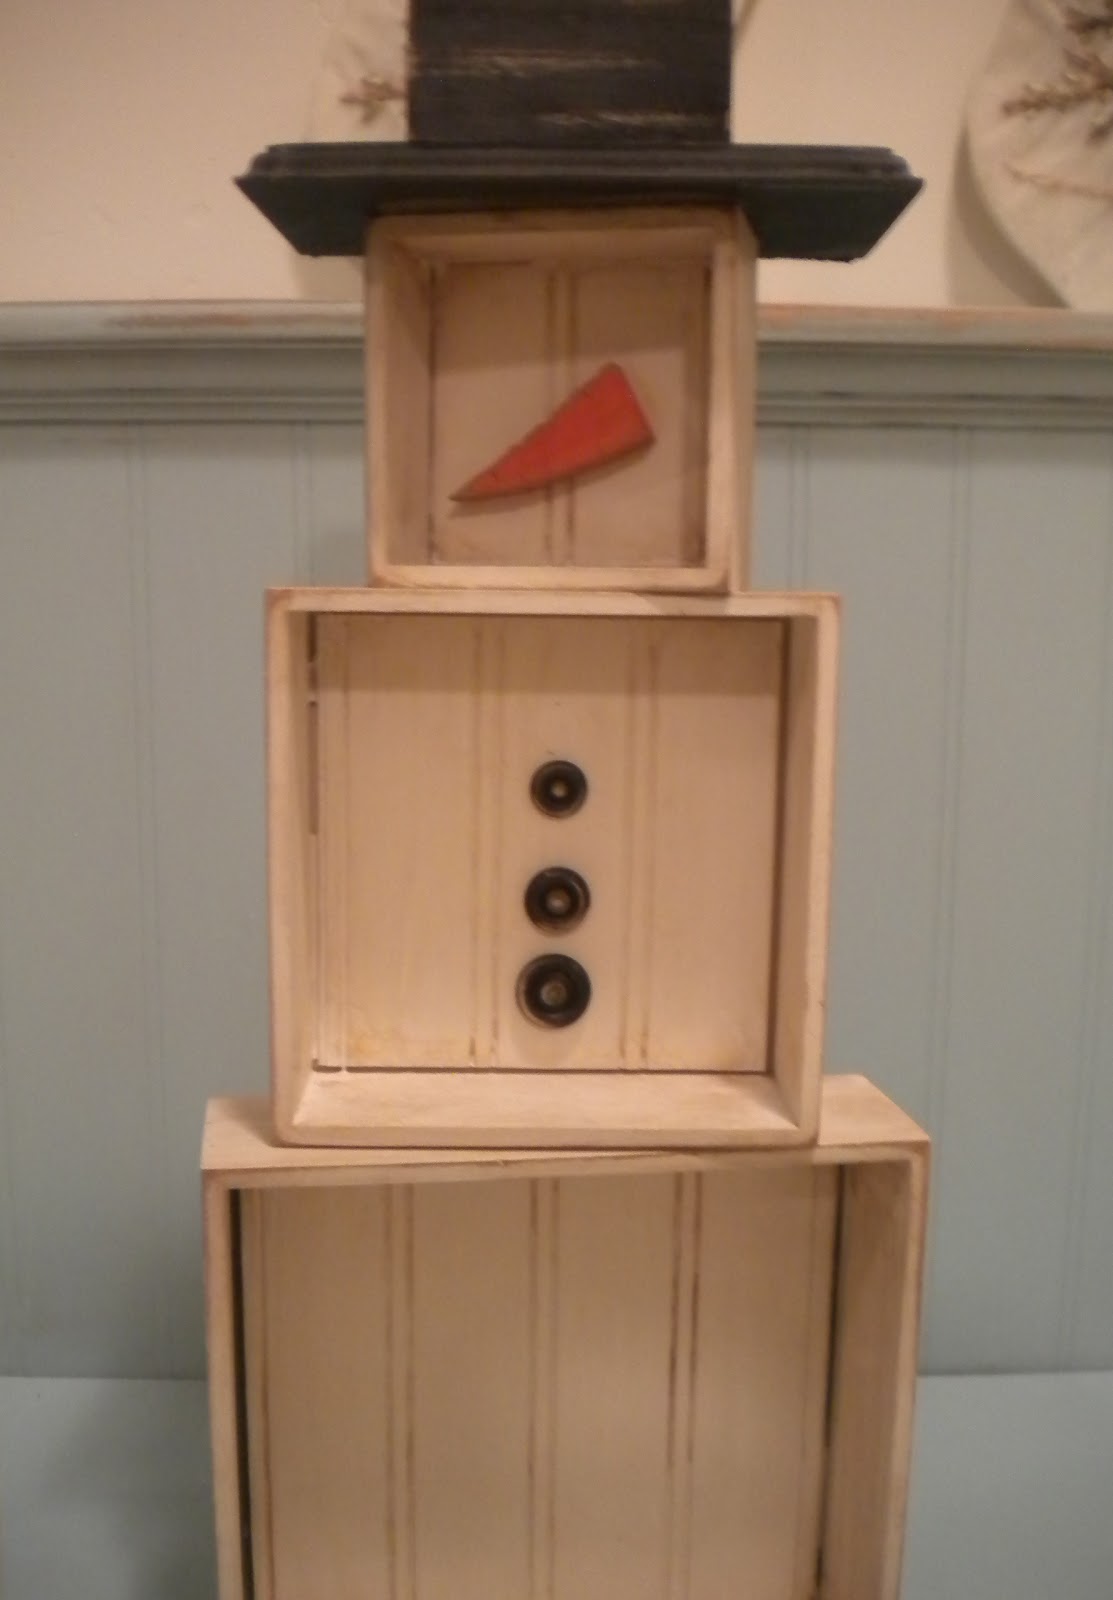 Poppies at Play: How To Make a Shadow Box Snowman